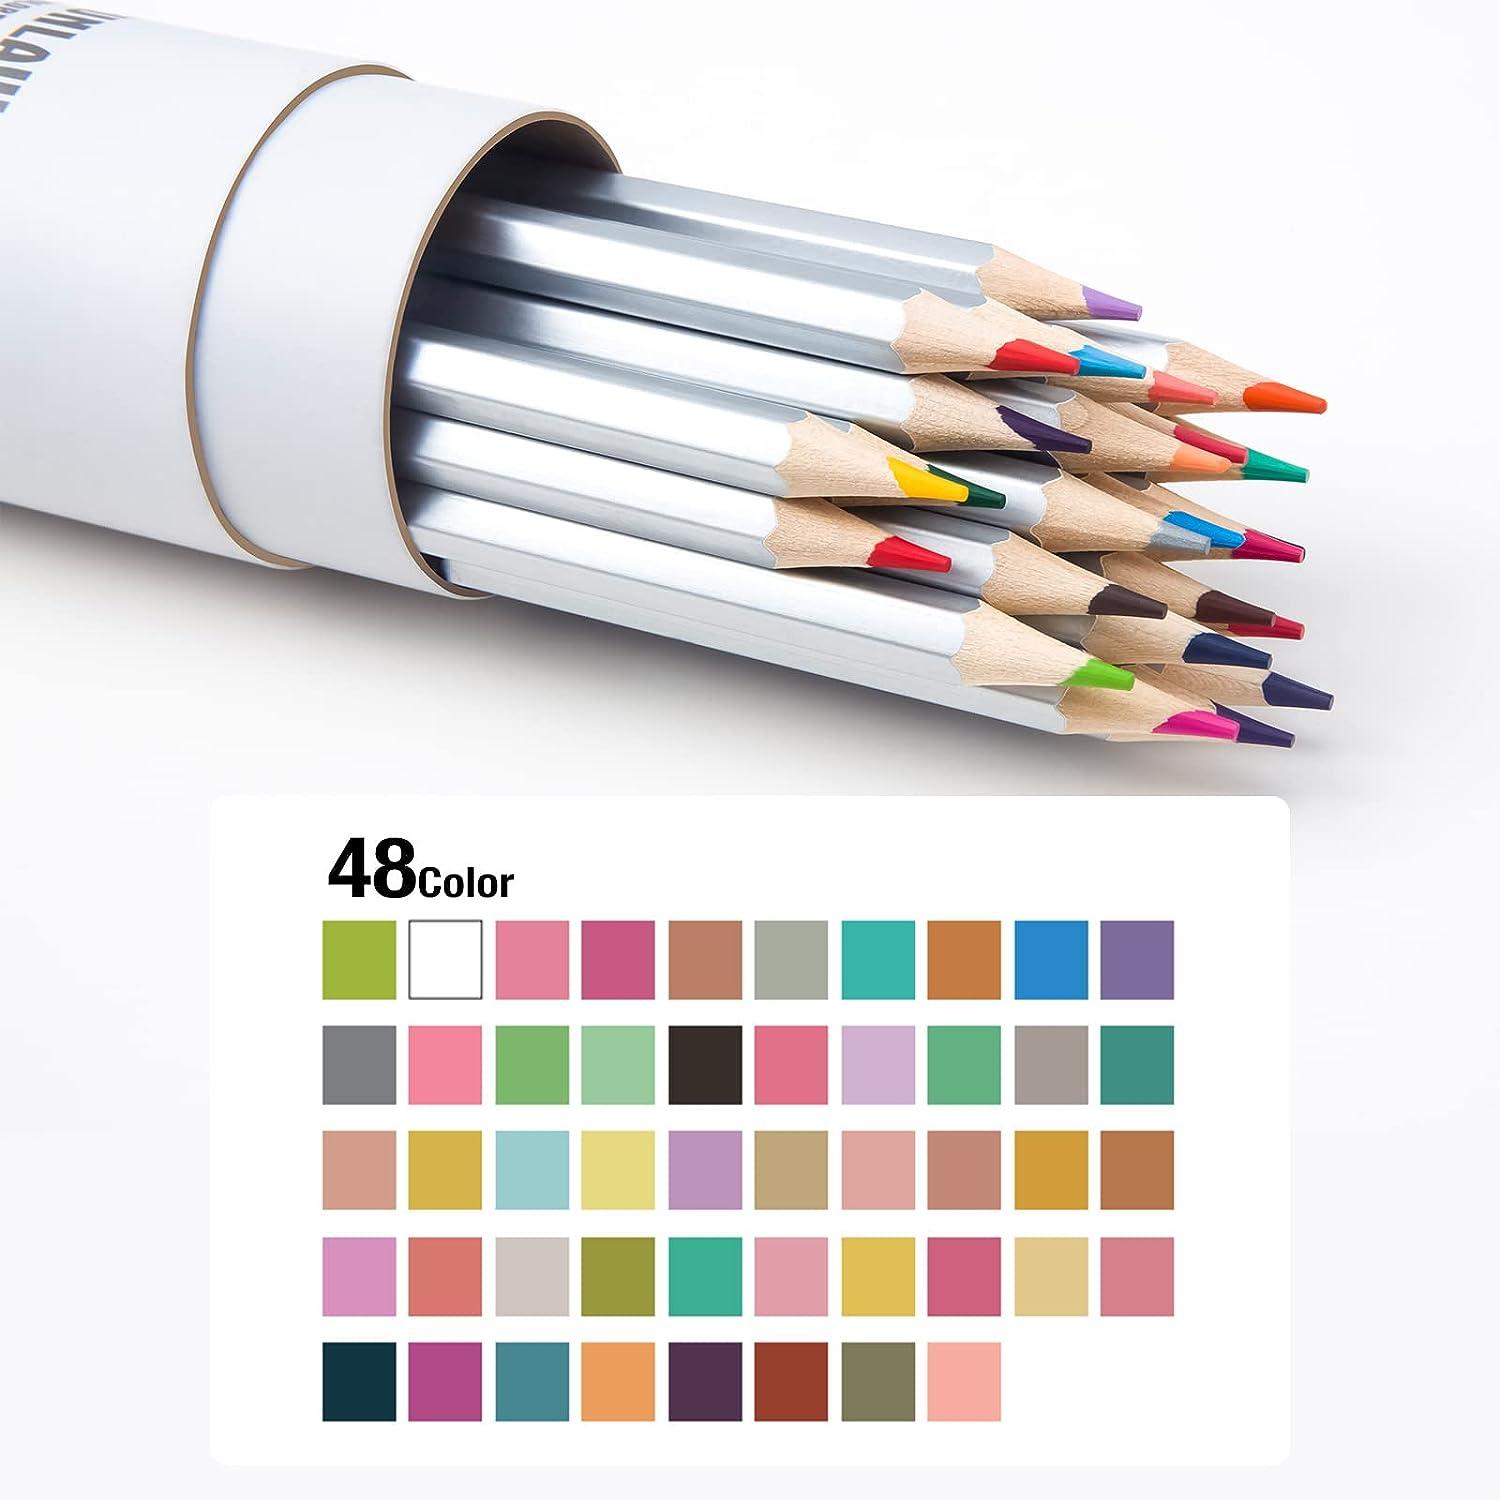 Colored Pencils 60 Unique Colors Premium Pre-sharpened Perfect for adult  coloring books,Drawing, Sketching, and Crafting Projects, Bold,Vibrant